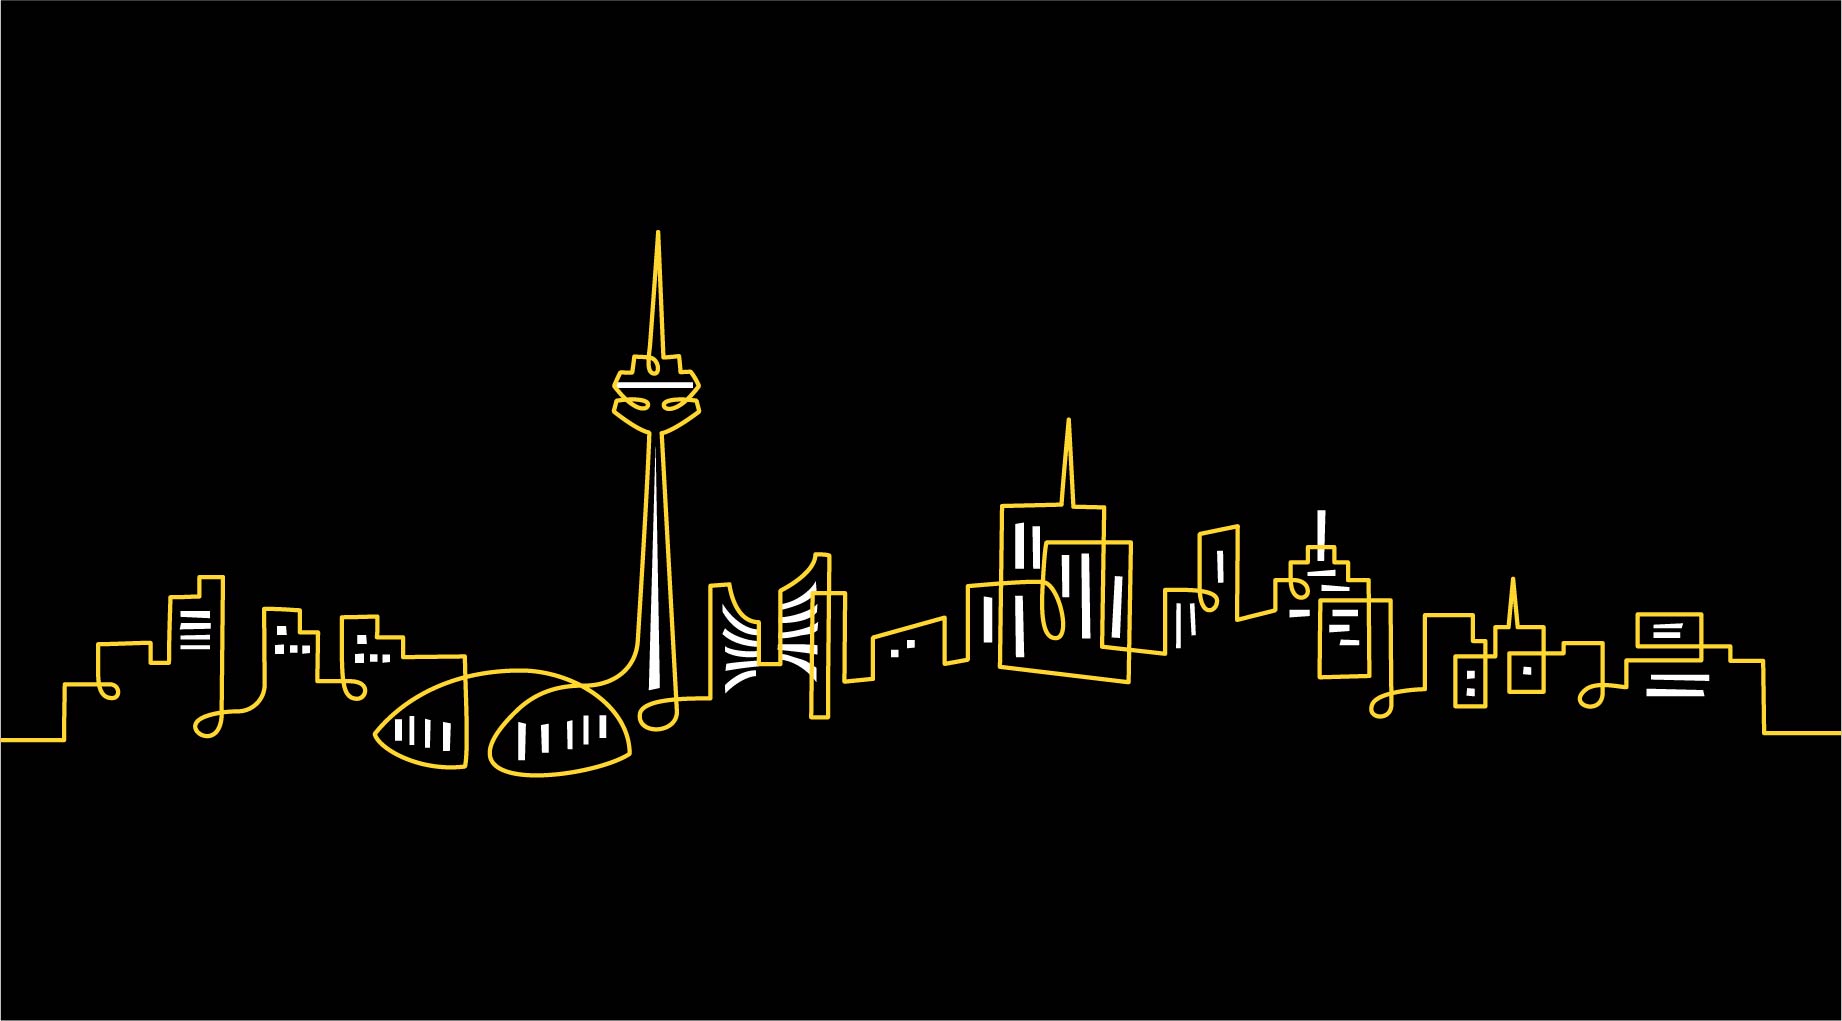 Yellow Pages Toronto Cityscape illustration by Loogart